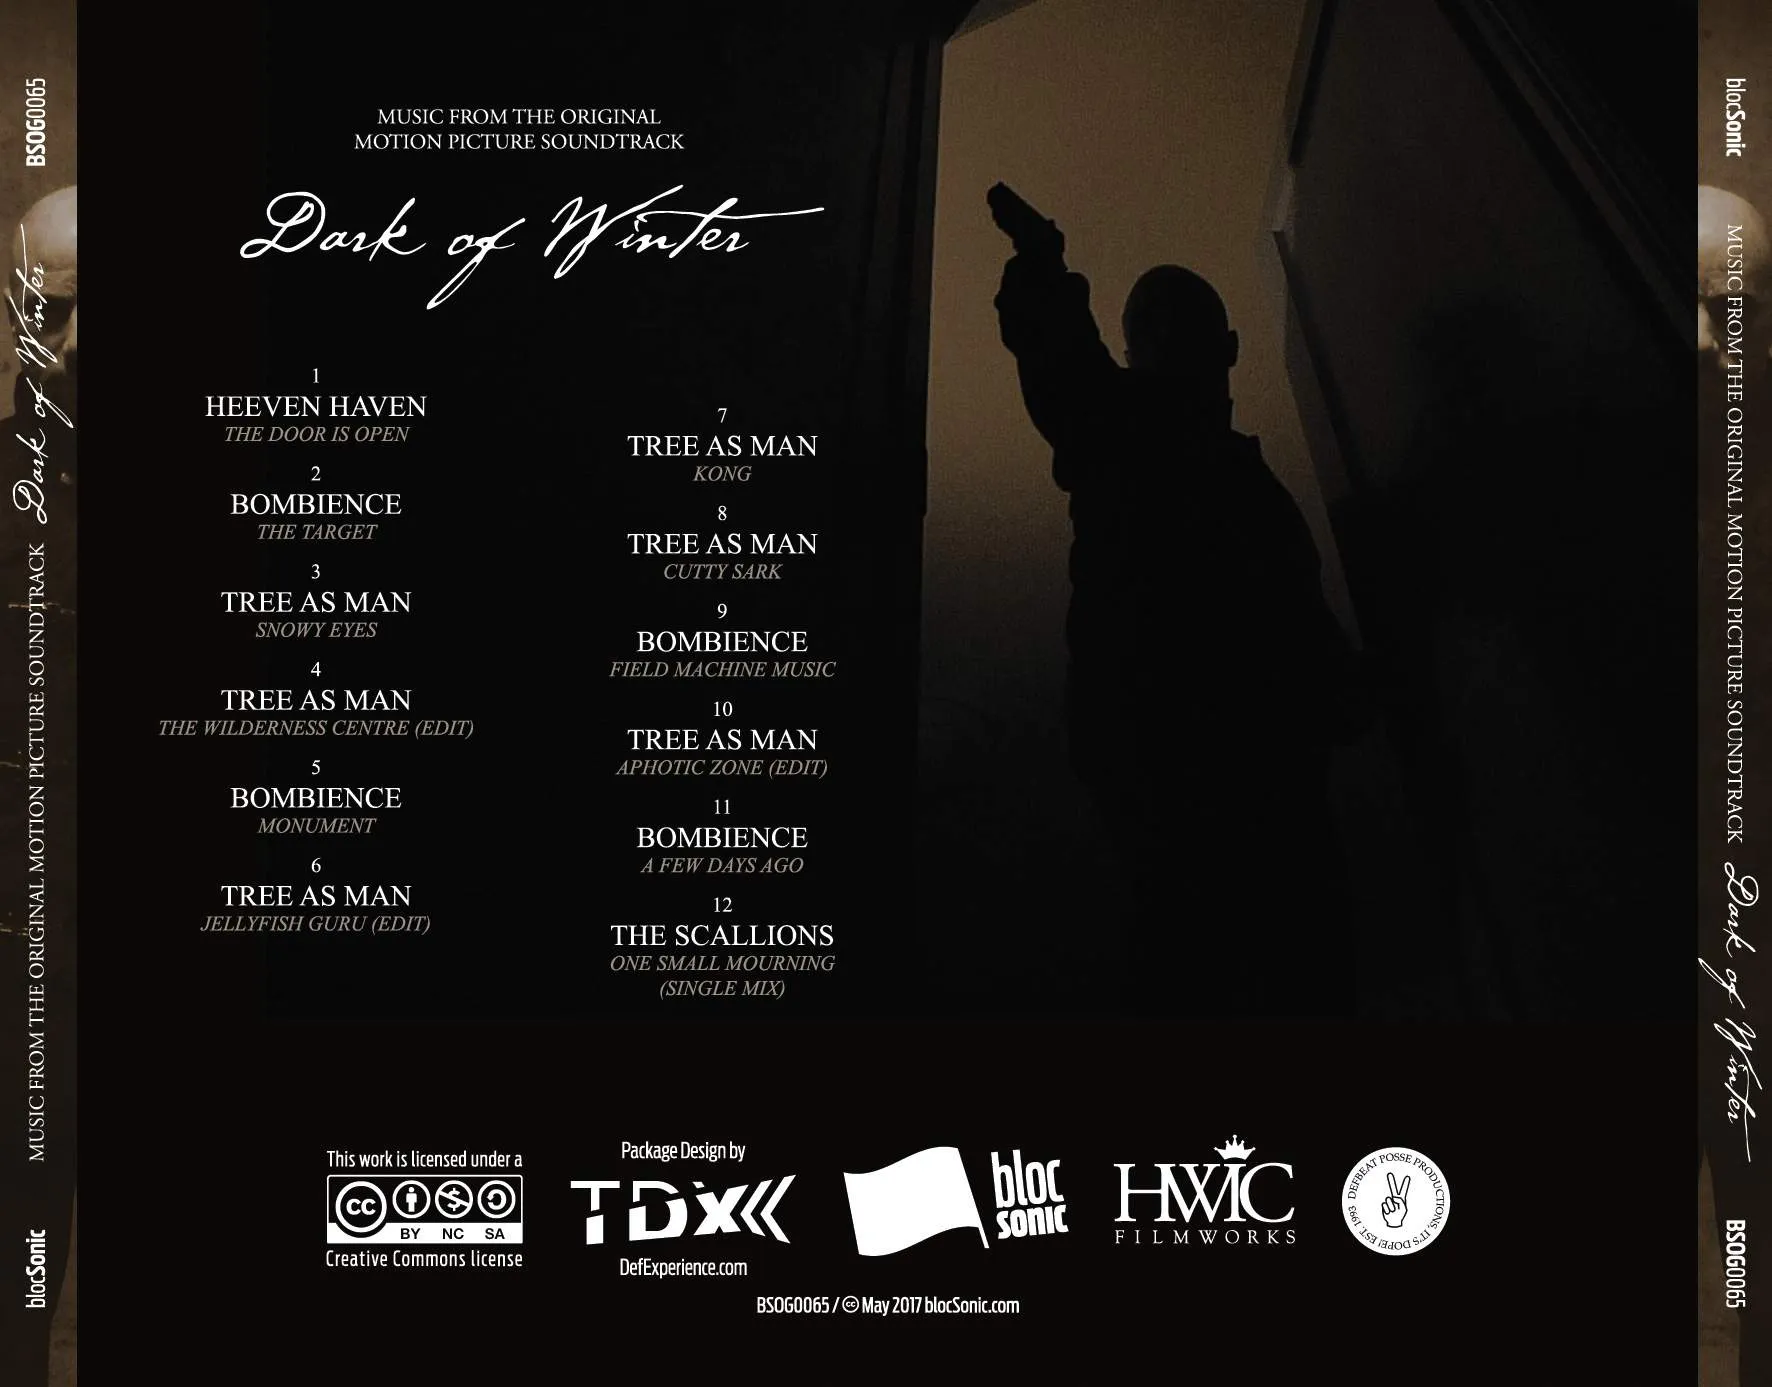 Album traycard for “Dark Of Winter: Music From The Original Motion Picture Soundtrack” by Various Artists